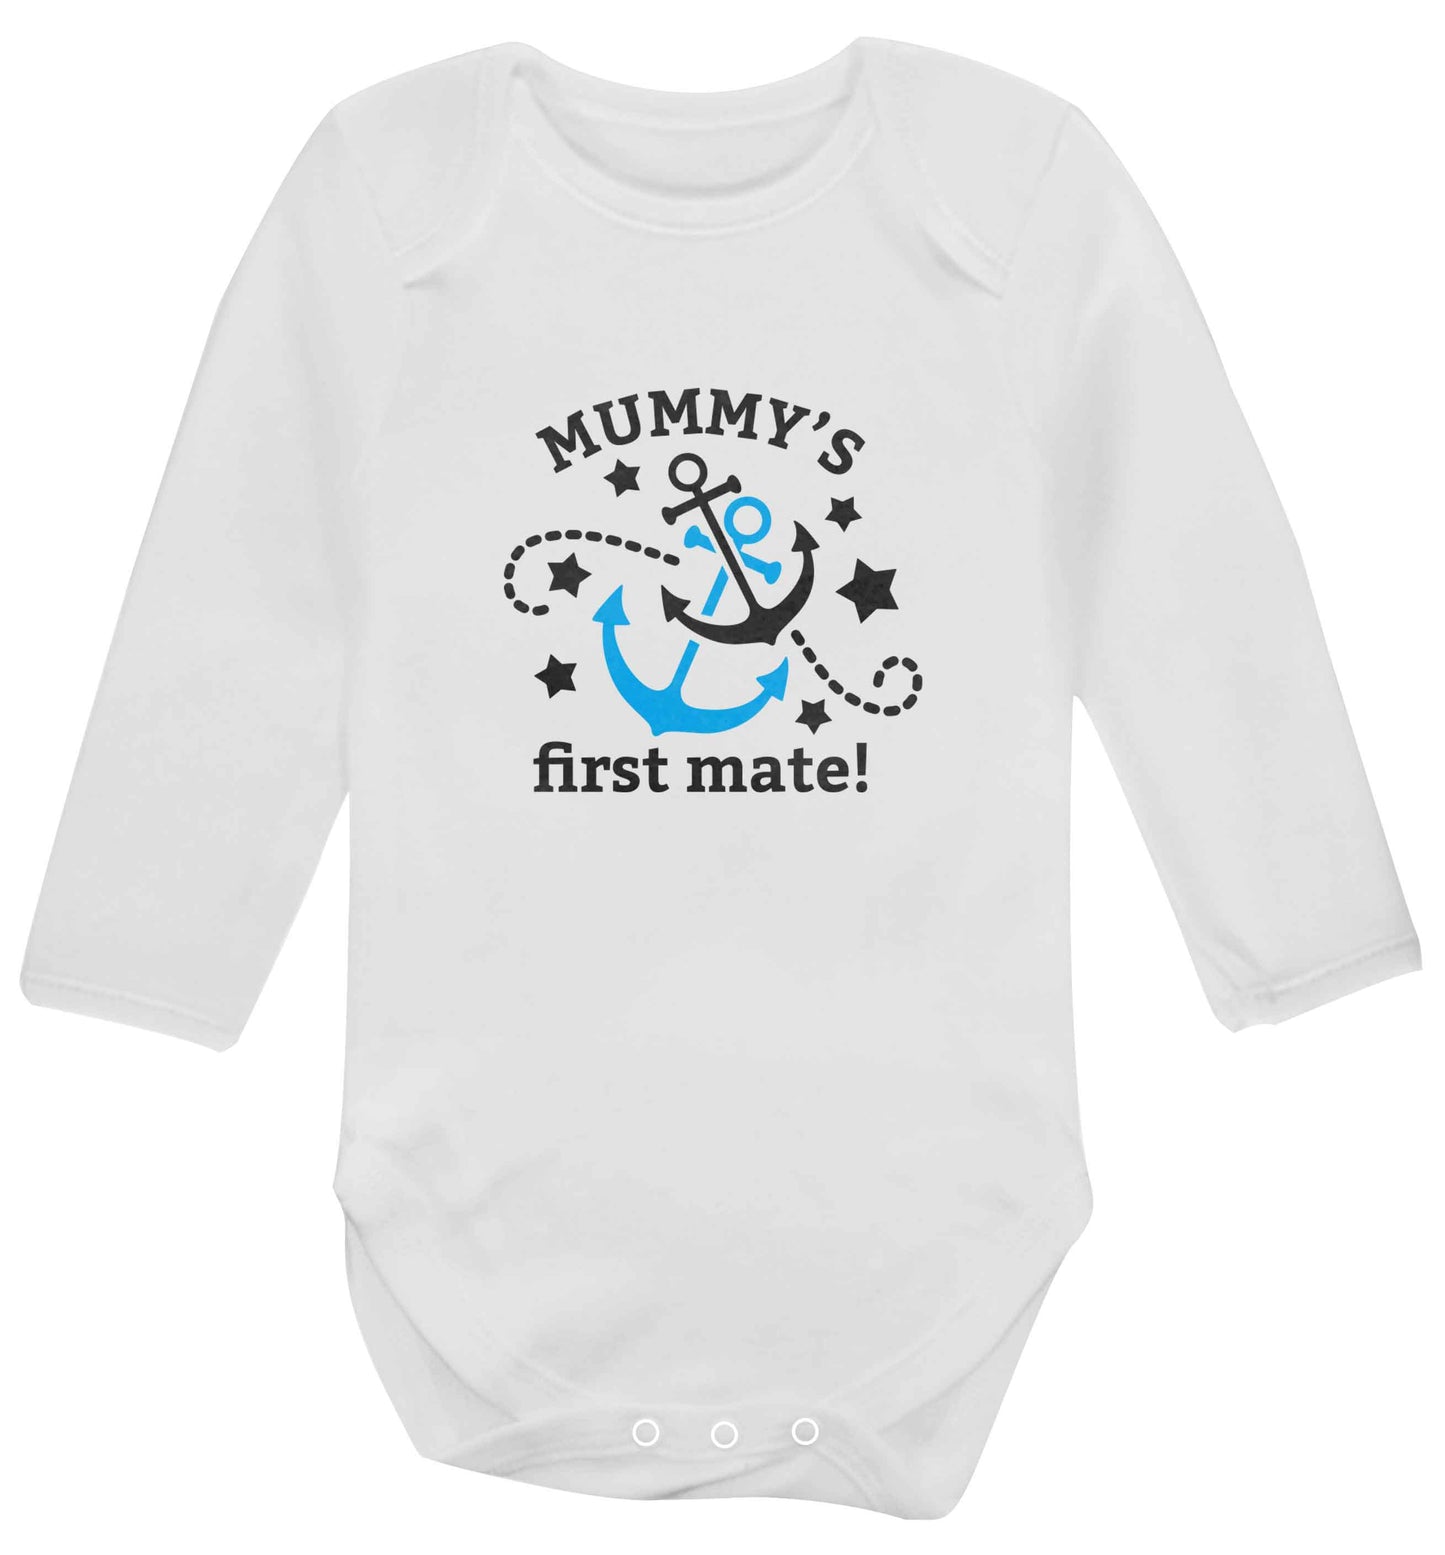 Mummy's First Mate baby vest long sleeved white 6-12 months